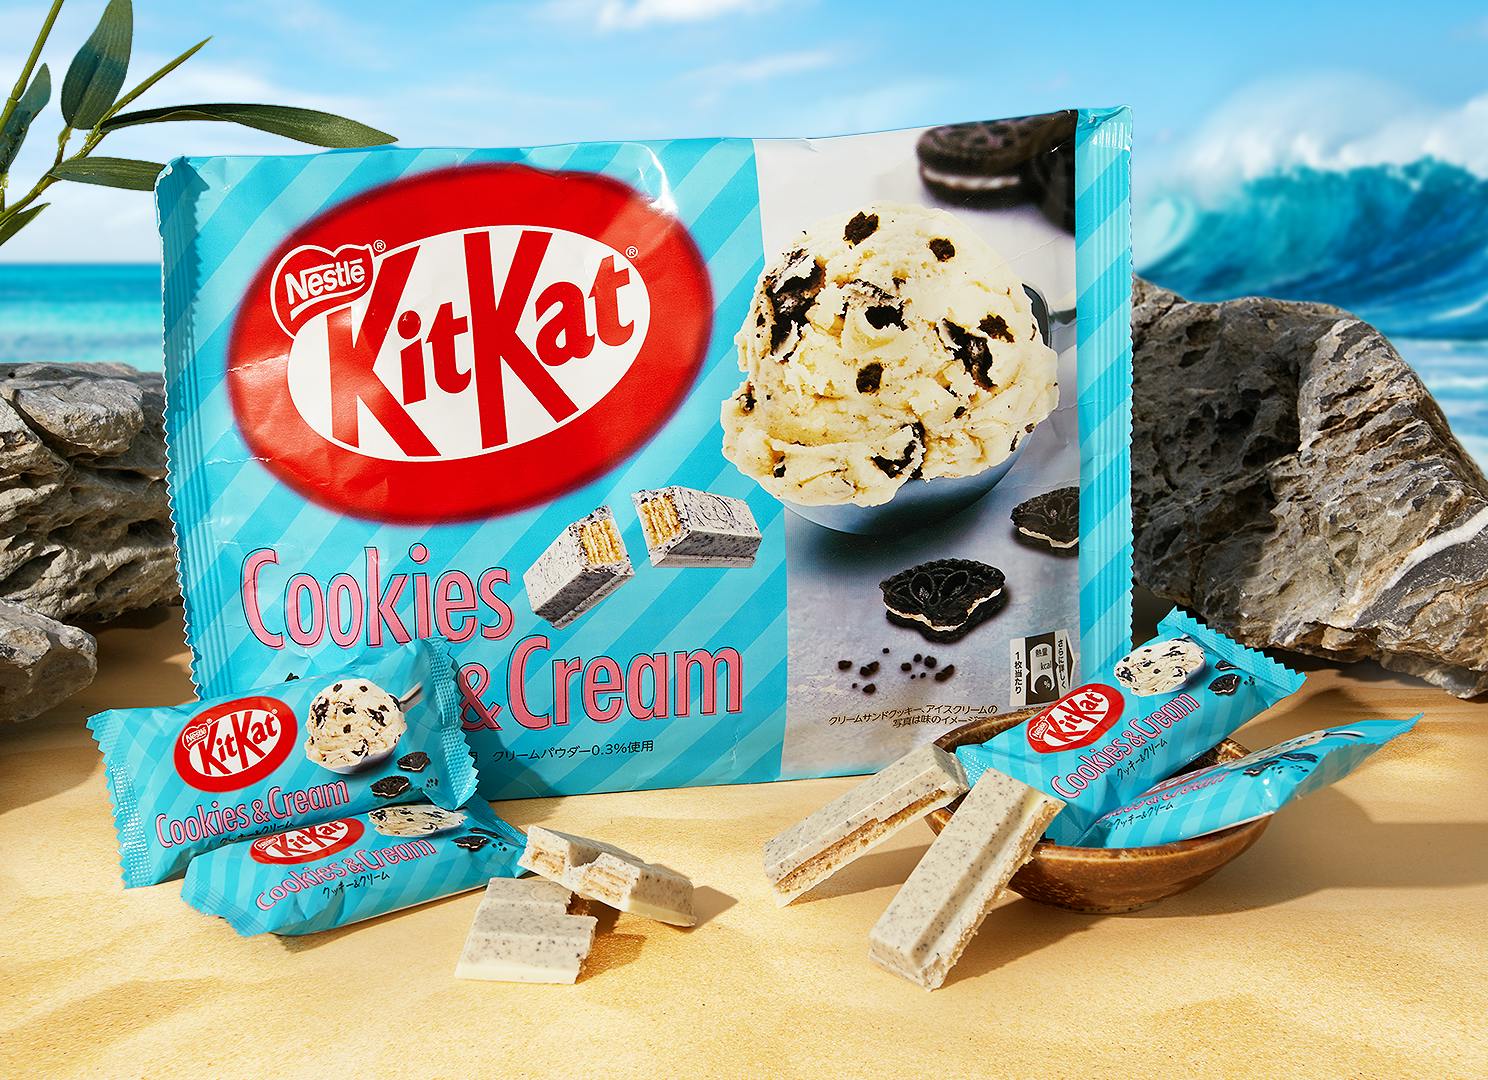 KitKat Cookies & Cream item sits on a soft, sandy beach in Okinawa, surrounded by blue waves, sea rocks, and greenery.